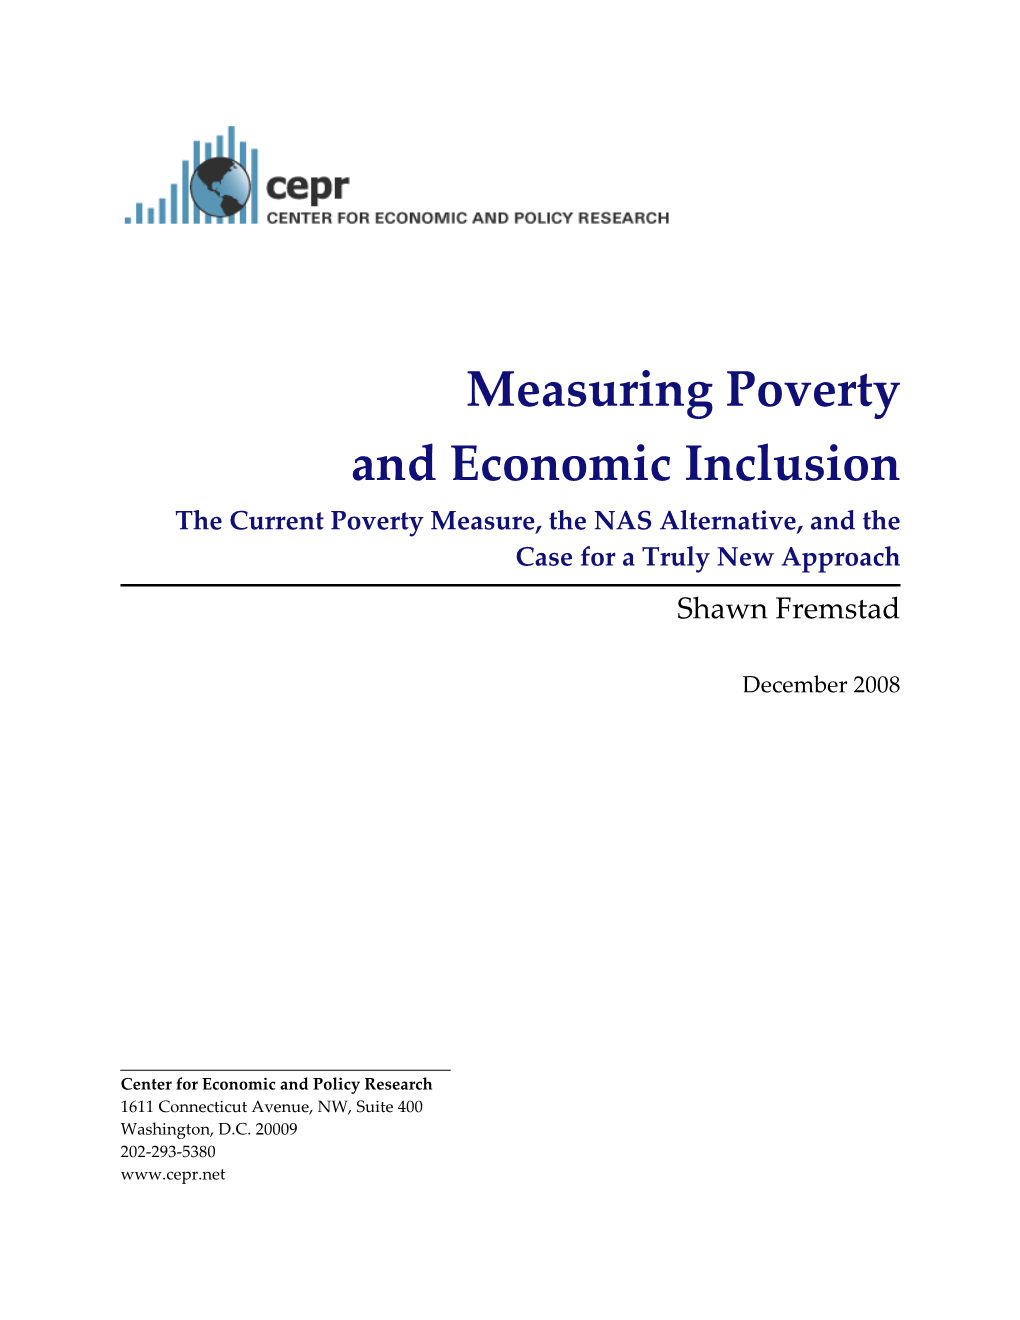 Measuring Poverty and Economic Inclusion the Current Poverty Measure, the NAS Alternative, and the Case for a Truly New Approach Shawn Fremstad